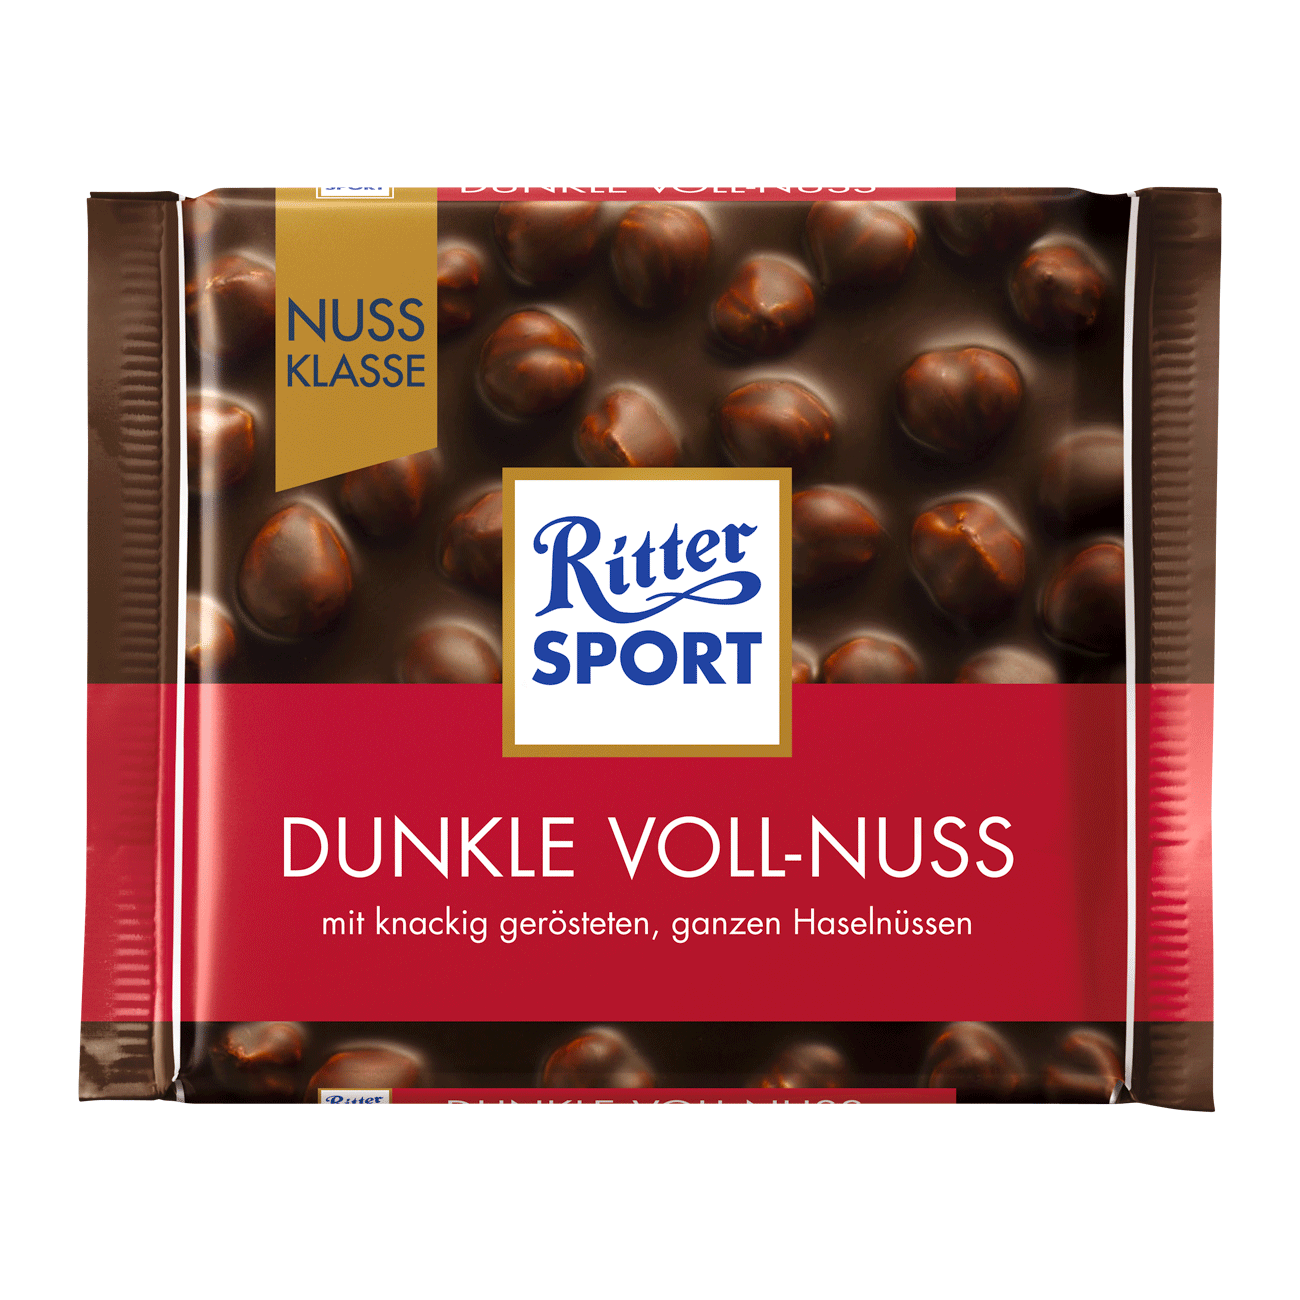 Dunkle Voll-Nuss